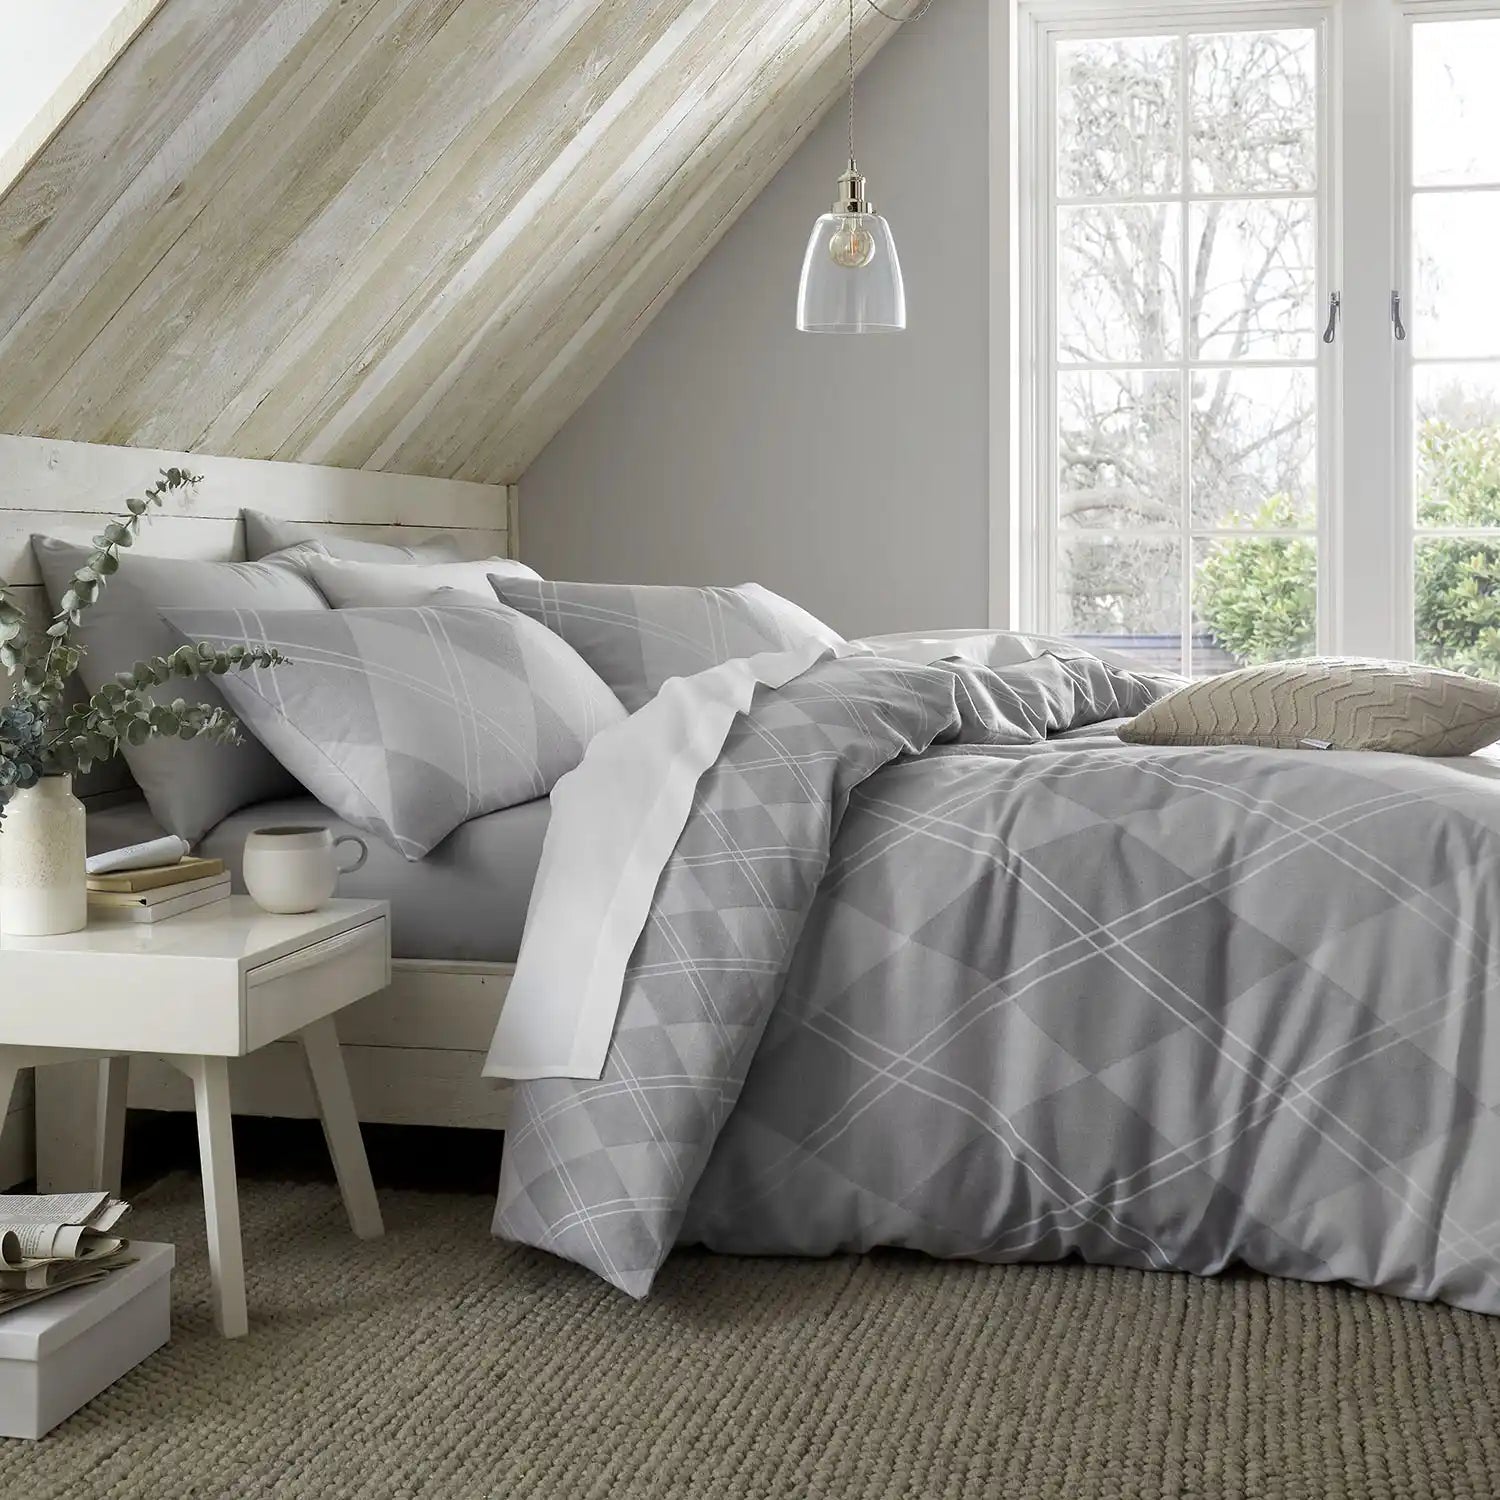  Catherine Lansfield Brushed Argyle Duvet Cover Set - Grey 1 Shaws Department Stores